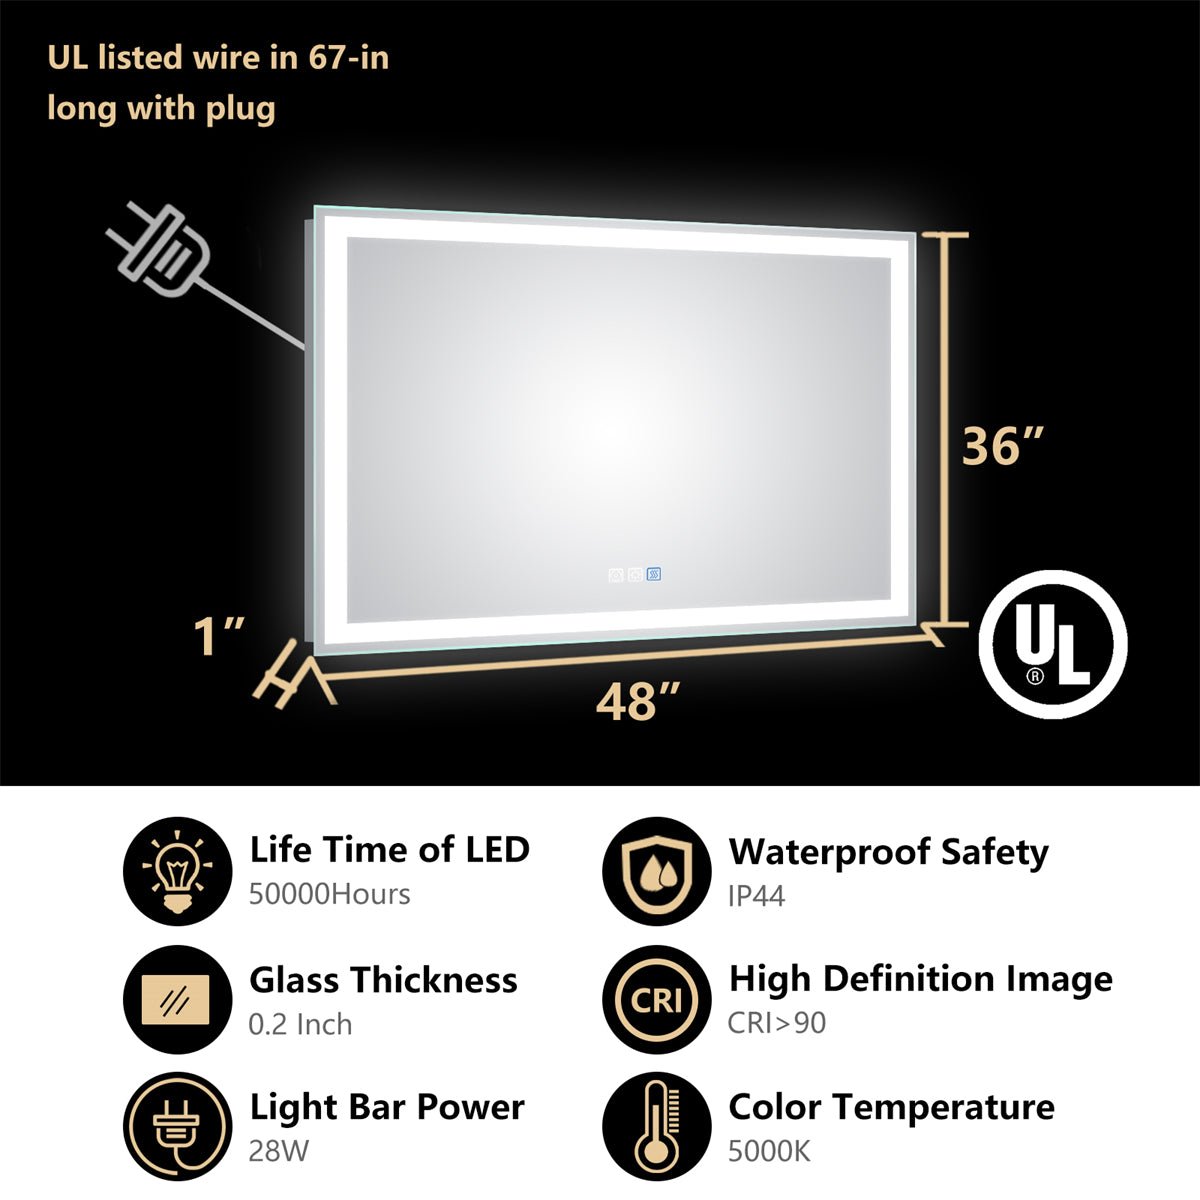 ExBrite 48"W x 36"H LED Large Bathroom Mirror,Tempered Glass,Dimmable,Anti Fog